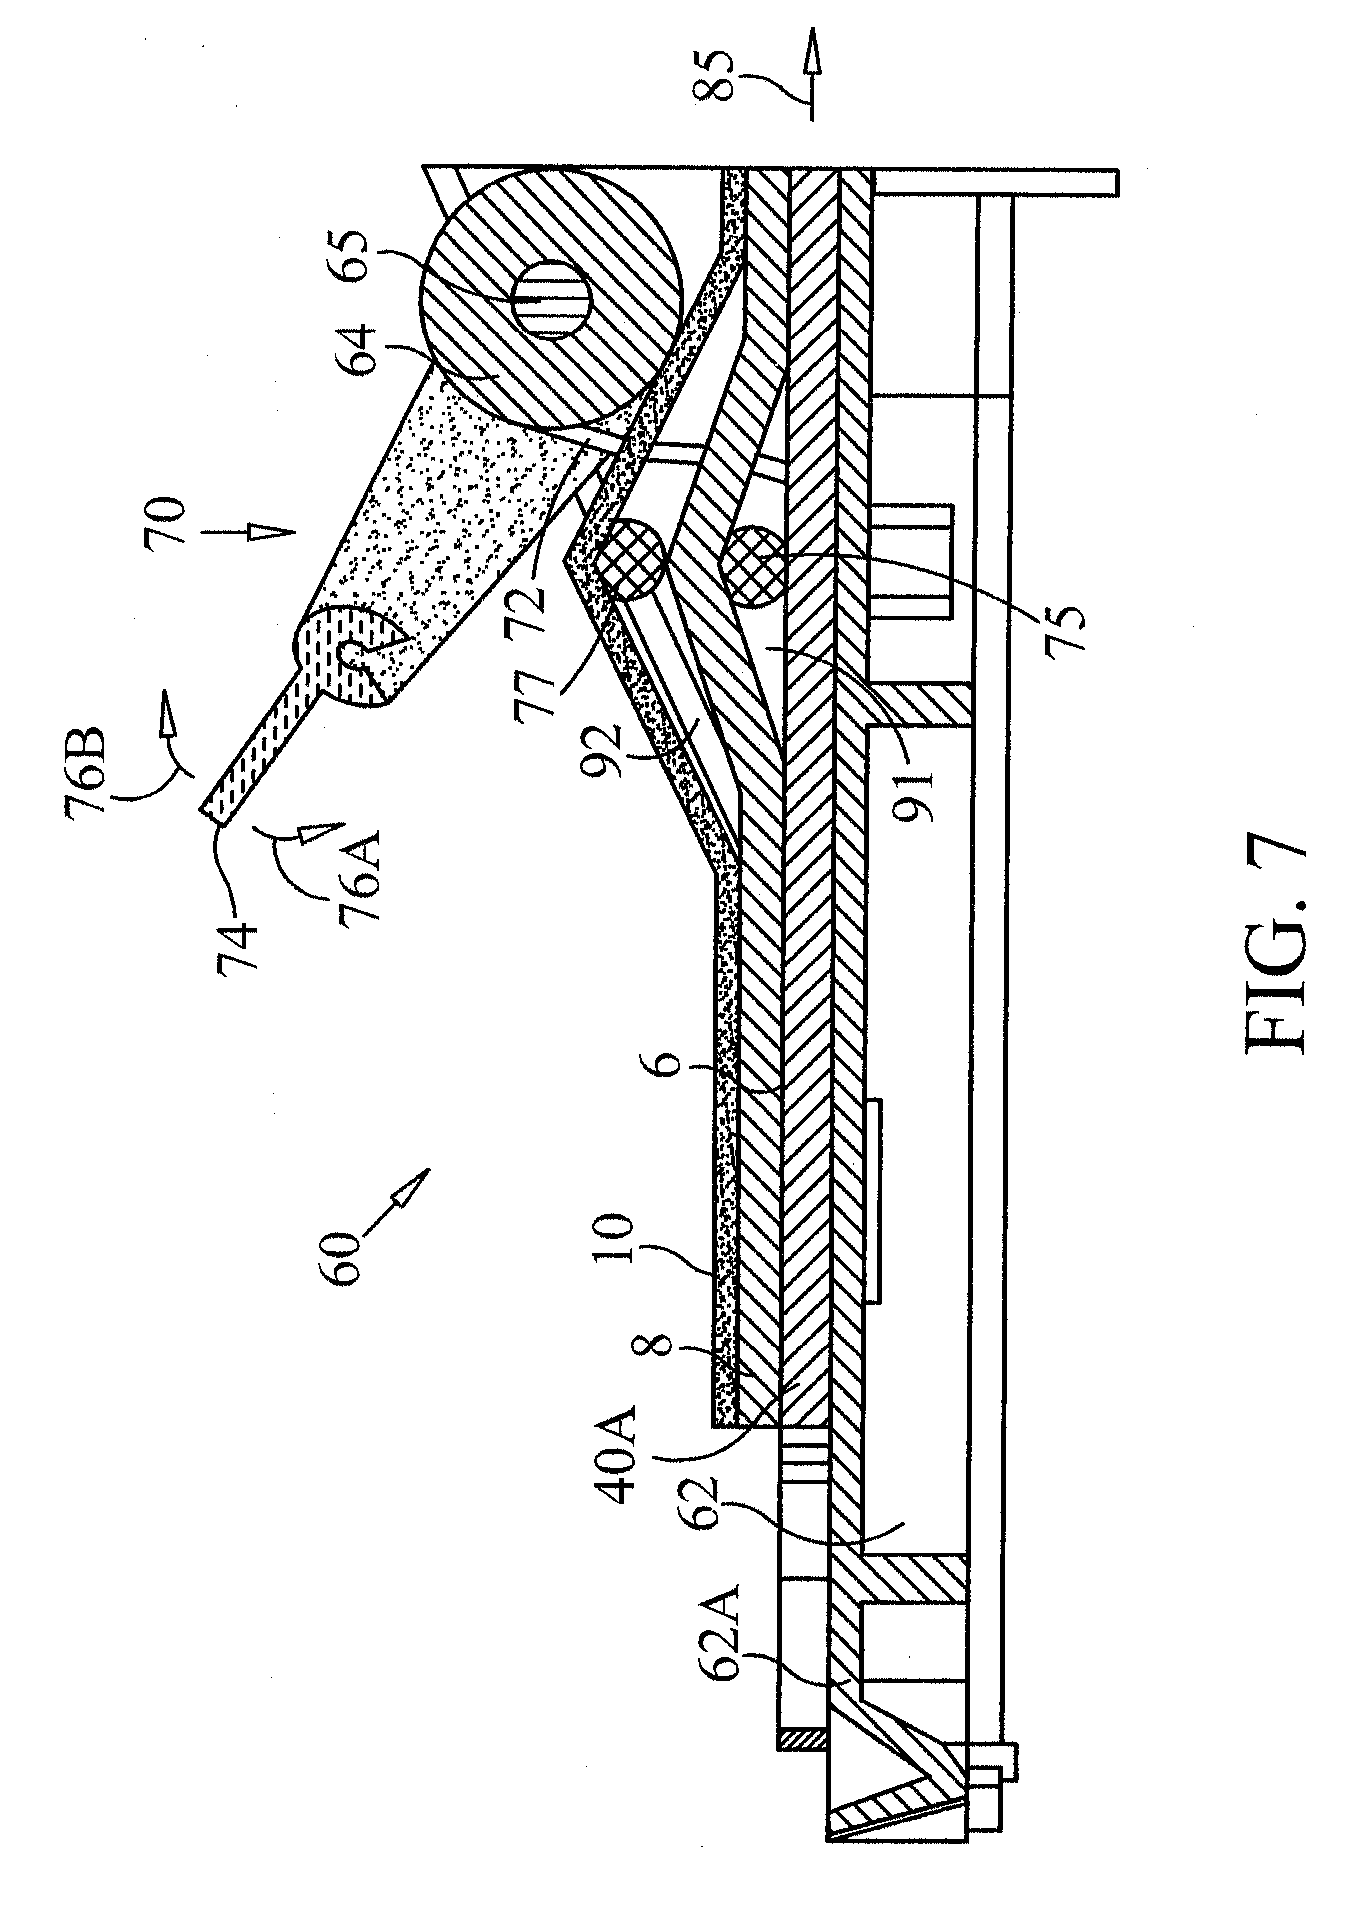 Electro-Blotting Devices, Systems, and Kits, And Methods For Their Use